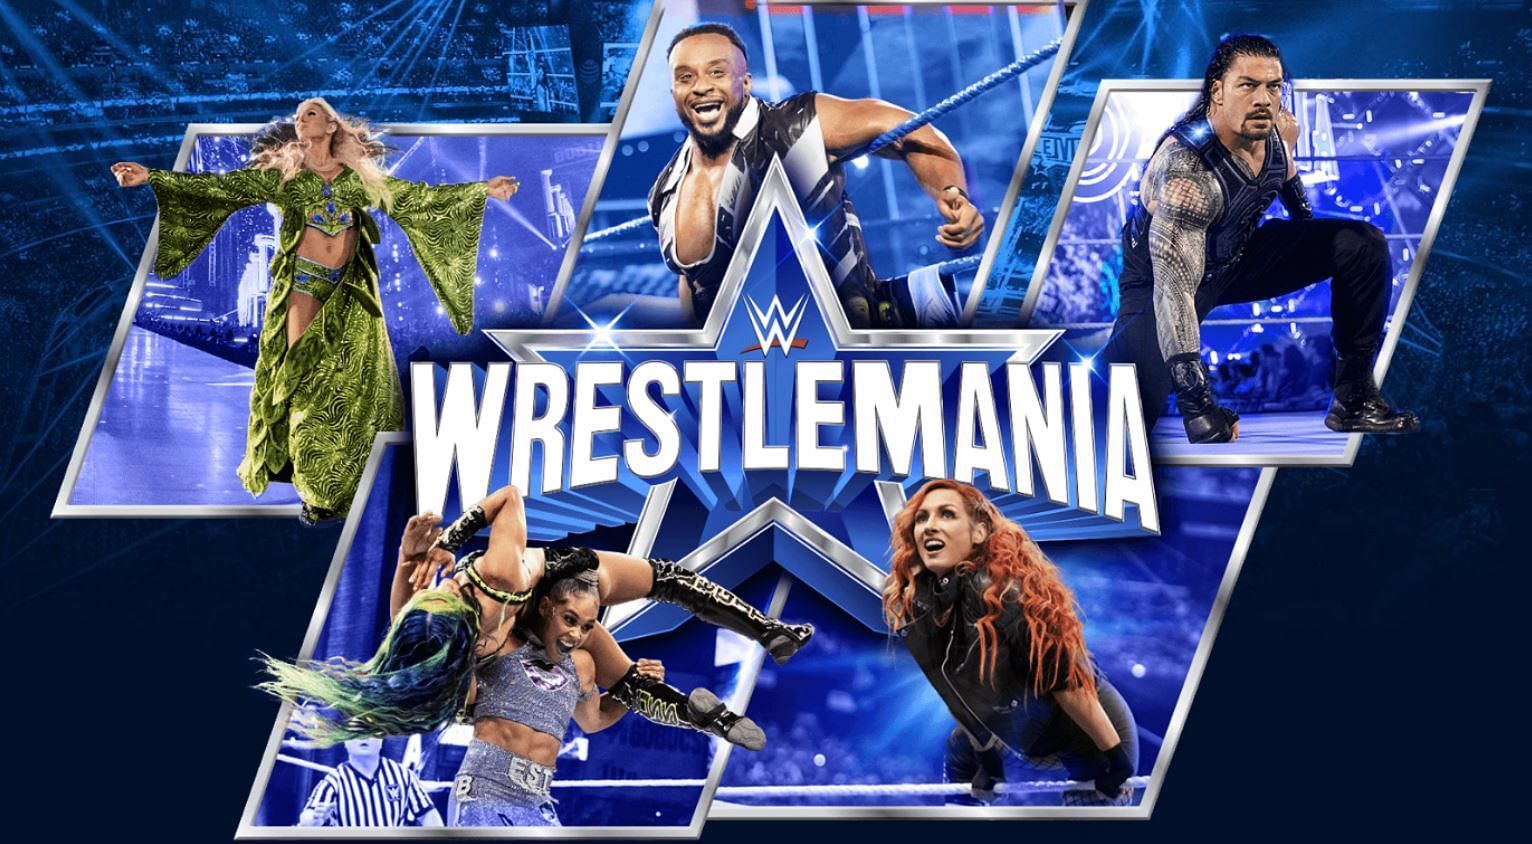 The events for Mania week have been confirmed